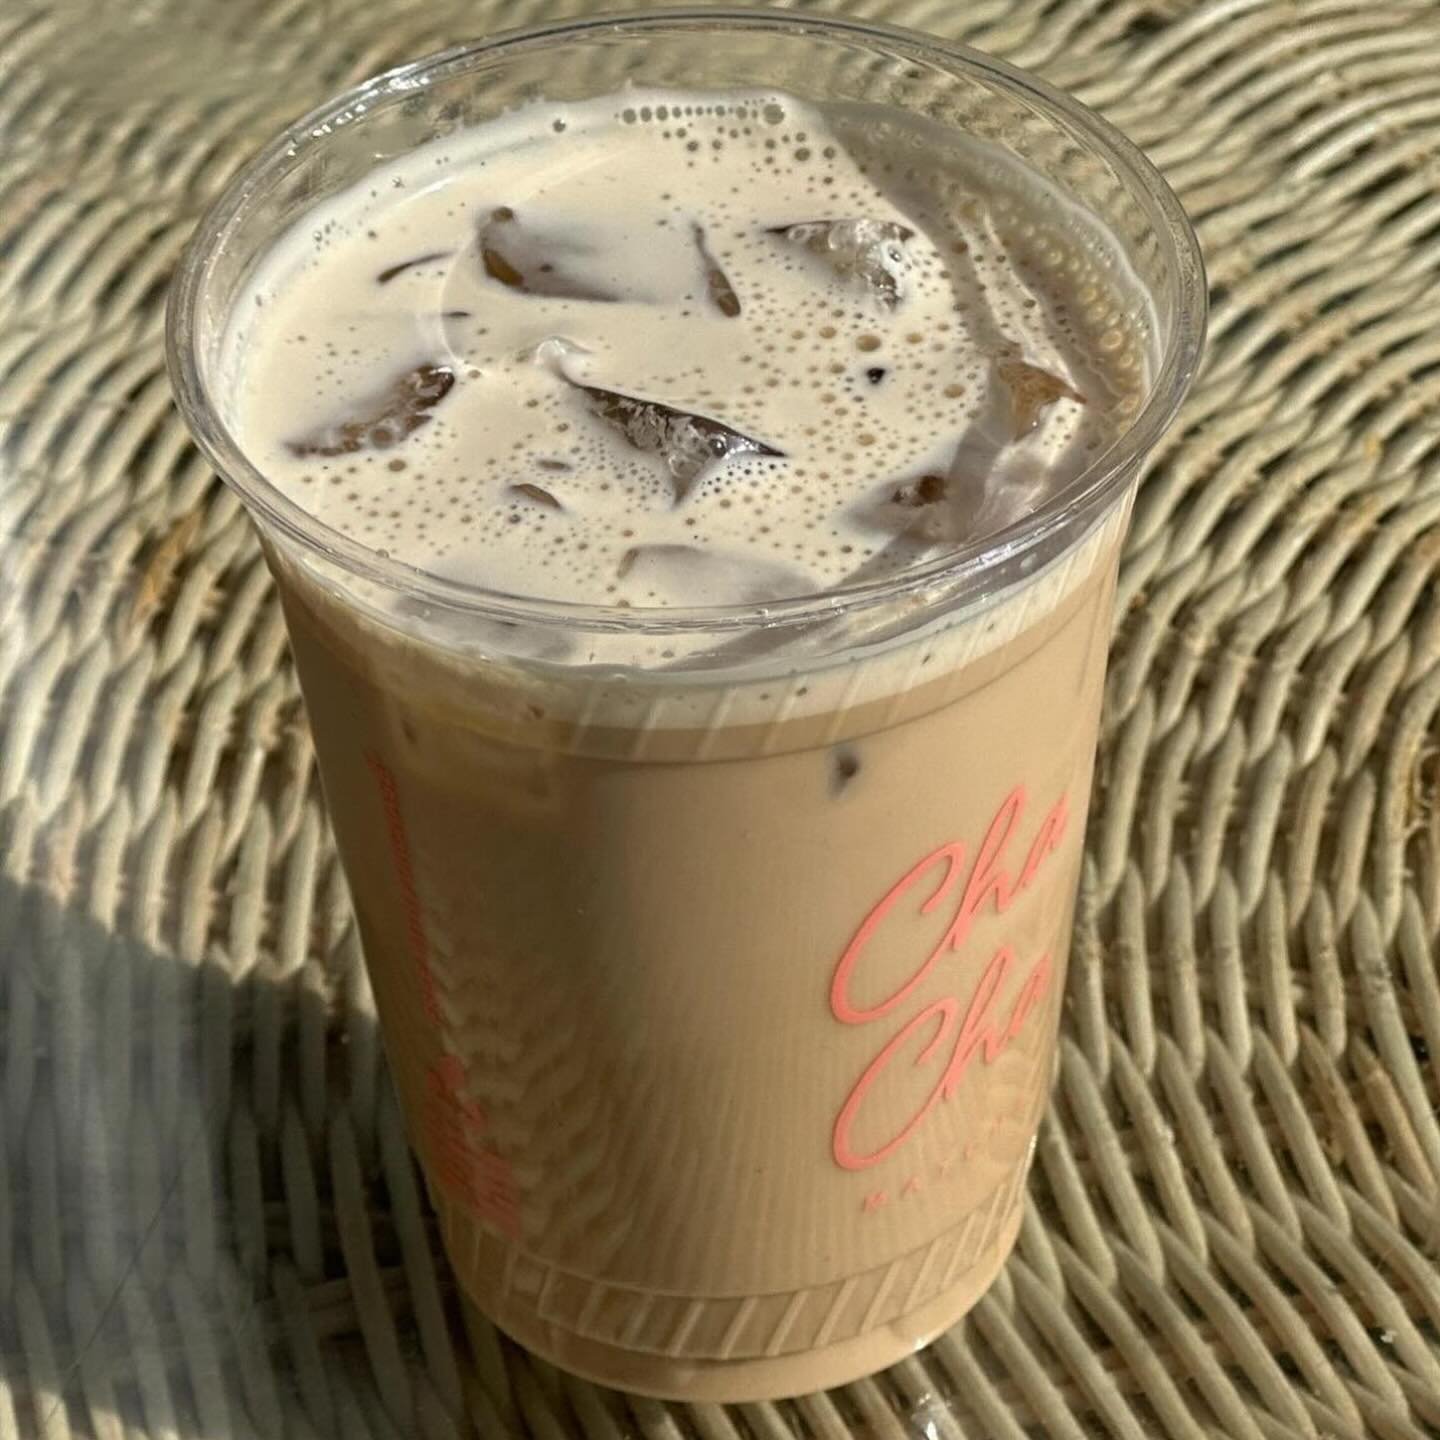 Did you know Cha Cha now has coffee? Try the new draft vanilla latte! It&rsquo;s delish! 🌴 1401 Abbot Kinney Blvd
.
.
(📷: @chachamatcha ) #abbotkinney #abbotkinneyblvd #chachamatcha #venicecalifornia